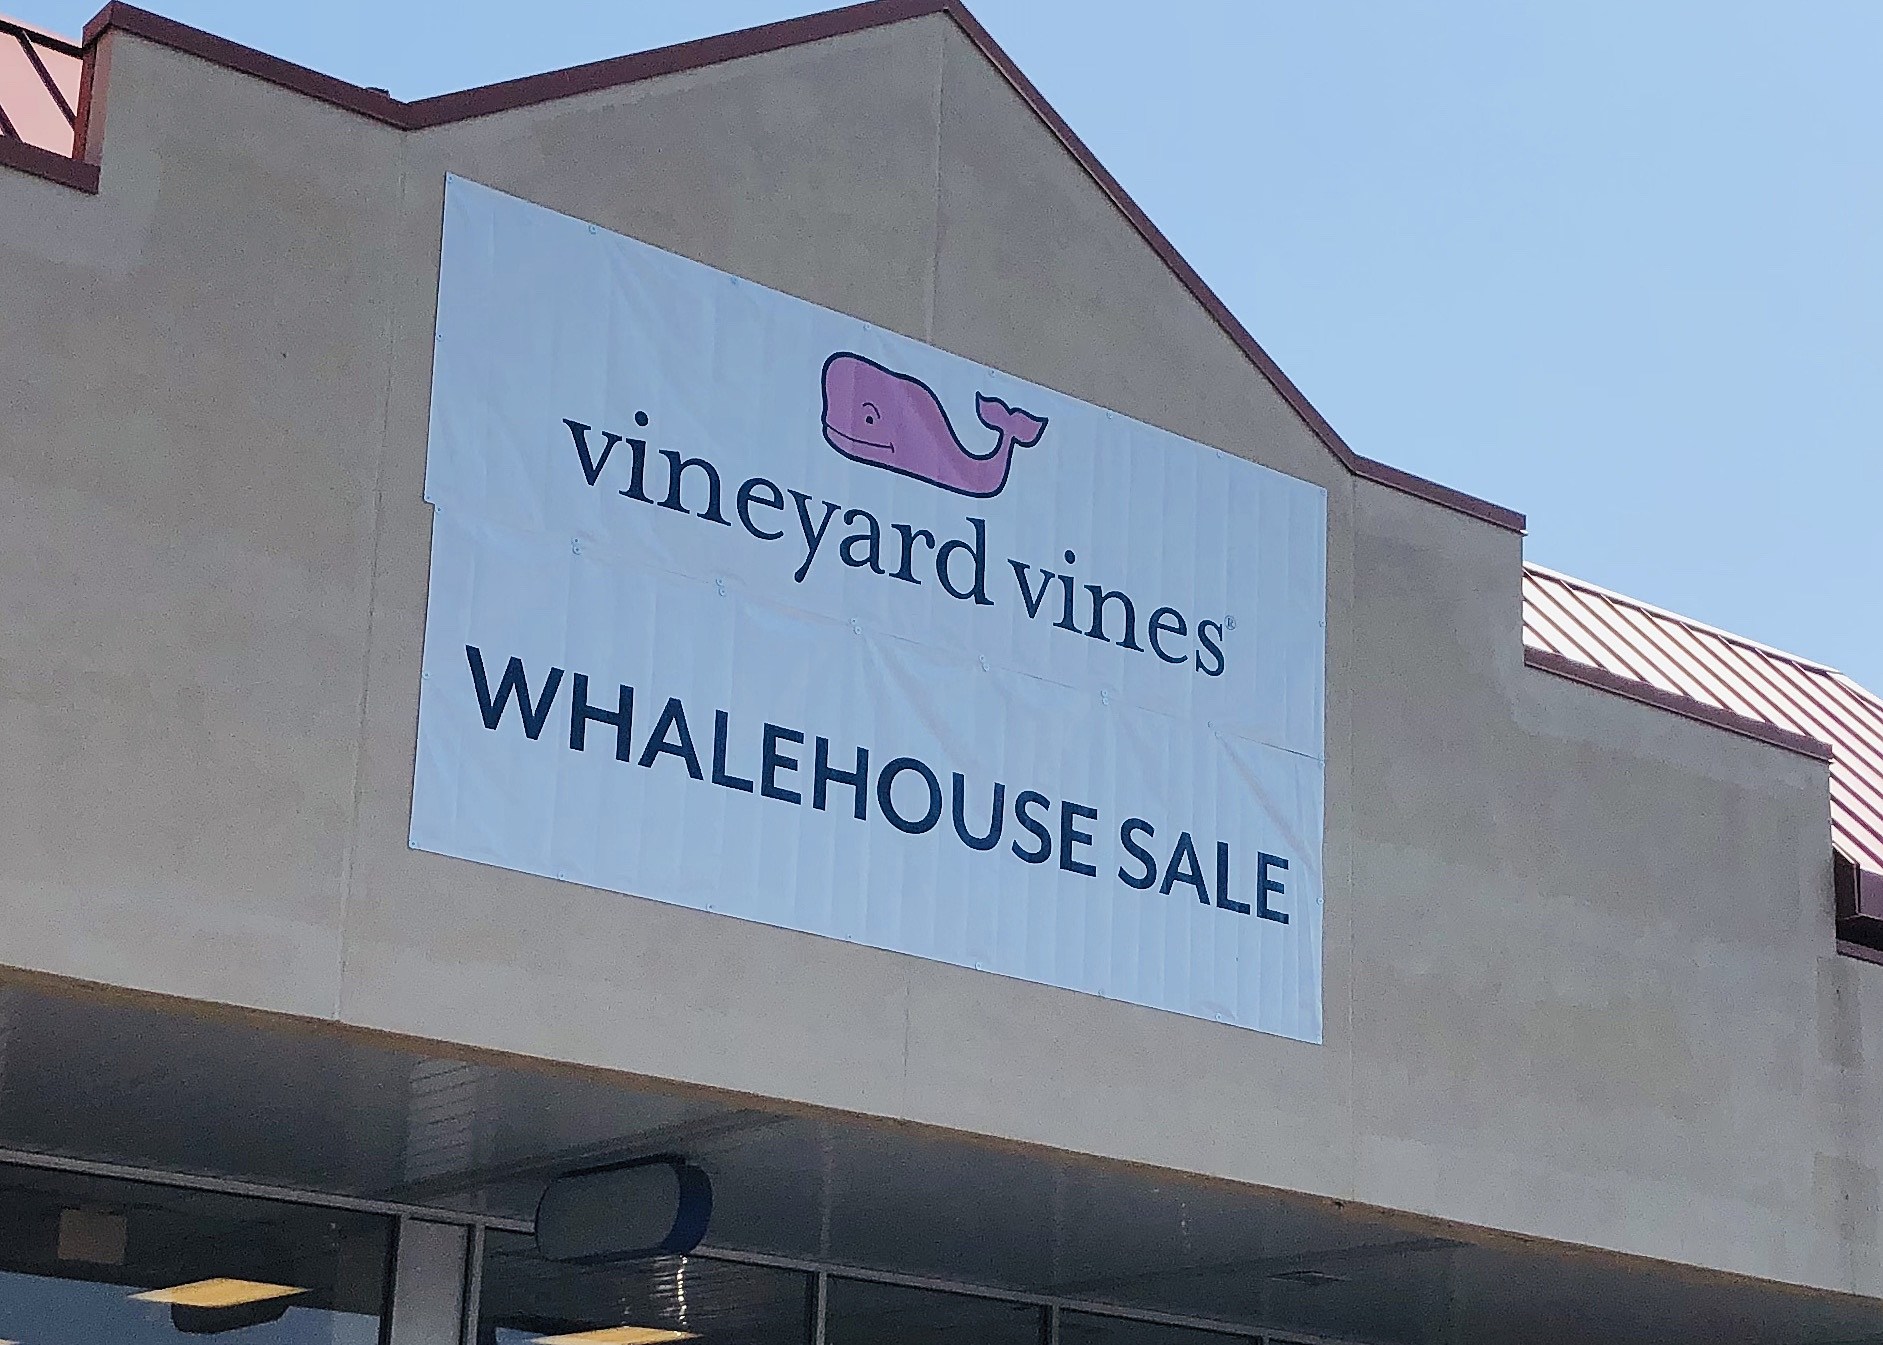 Vineyard Vines Popped Up in Bayville...Just for a while